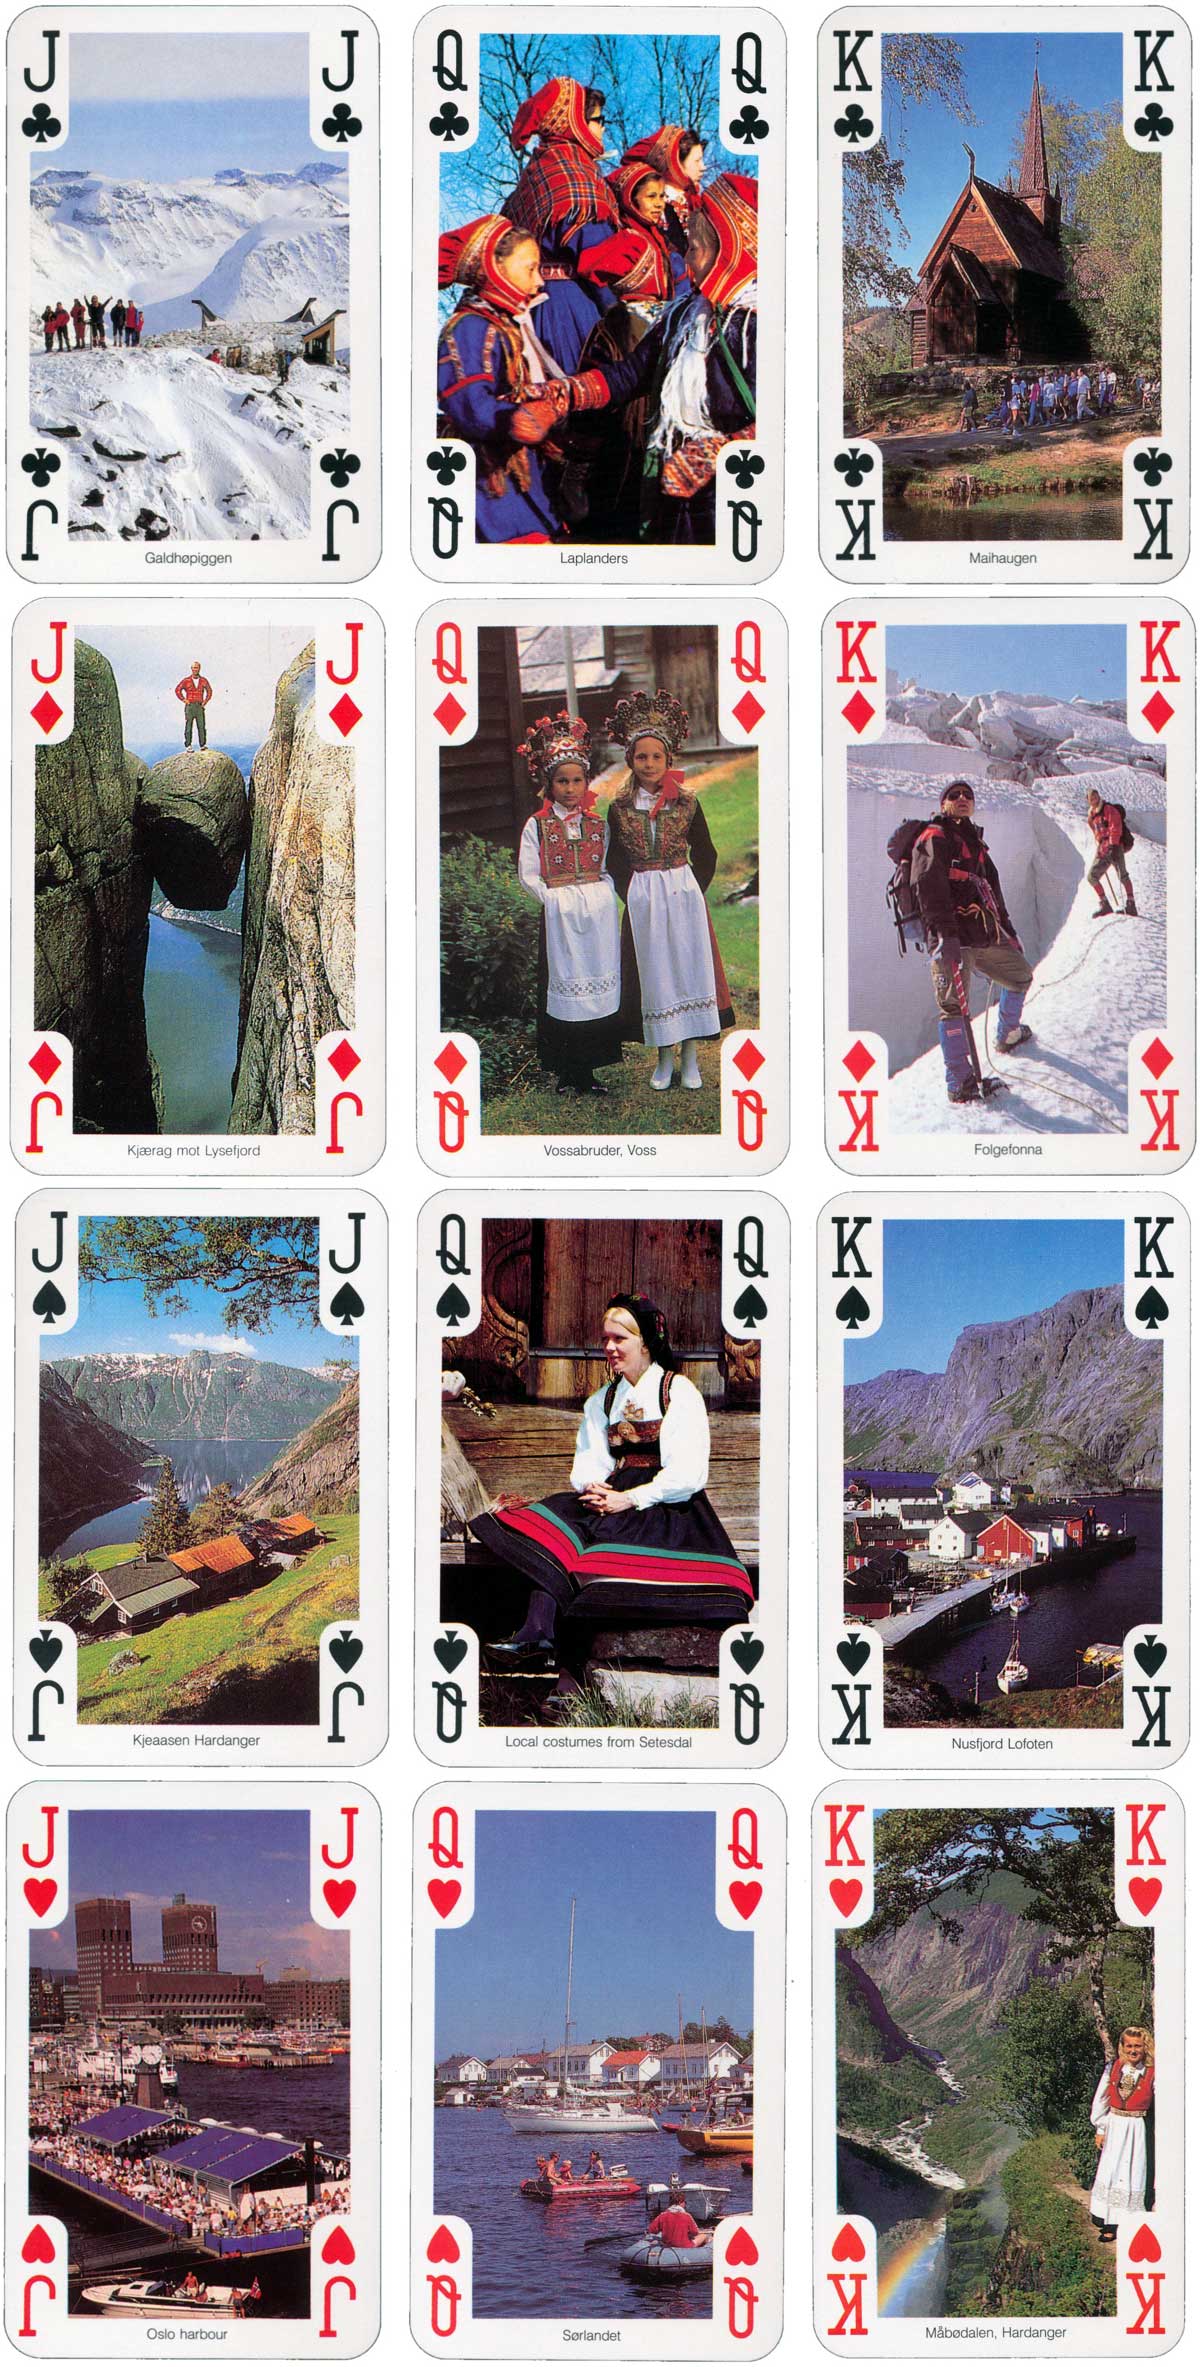 “54 Views from Norway” souvenir playing cards published by Normanns Kunstforlag A/S, c.1990s